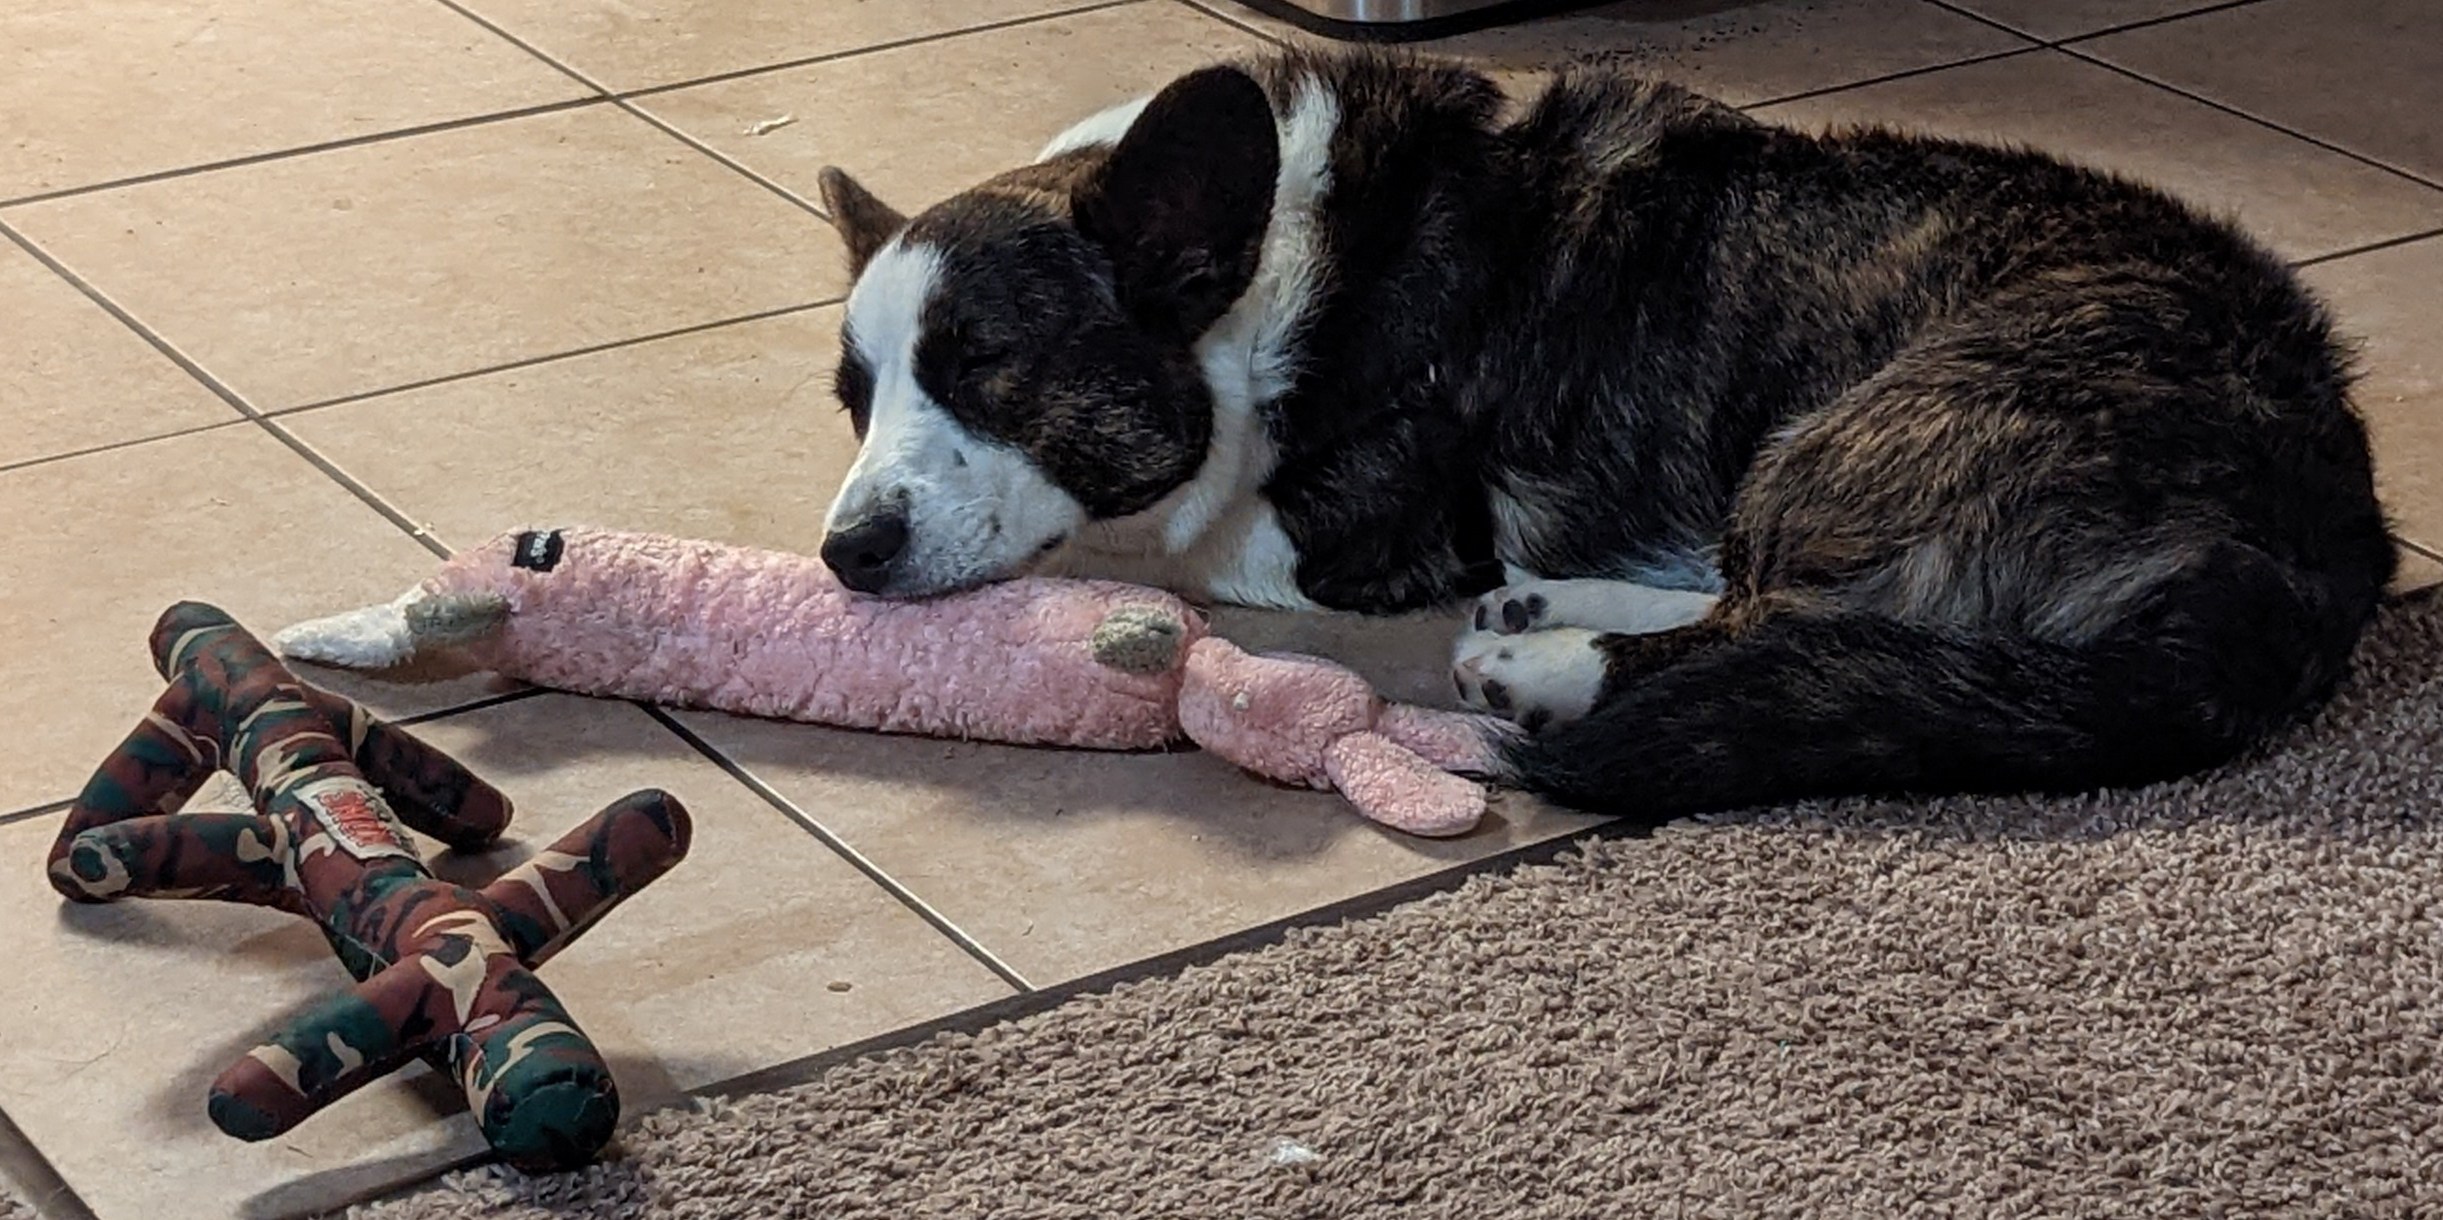 Cwlwm the dog napping with toys